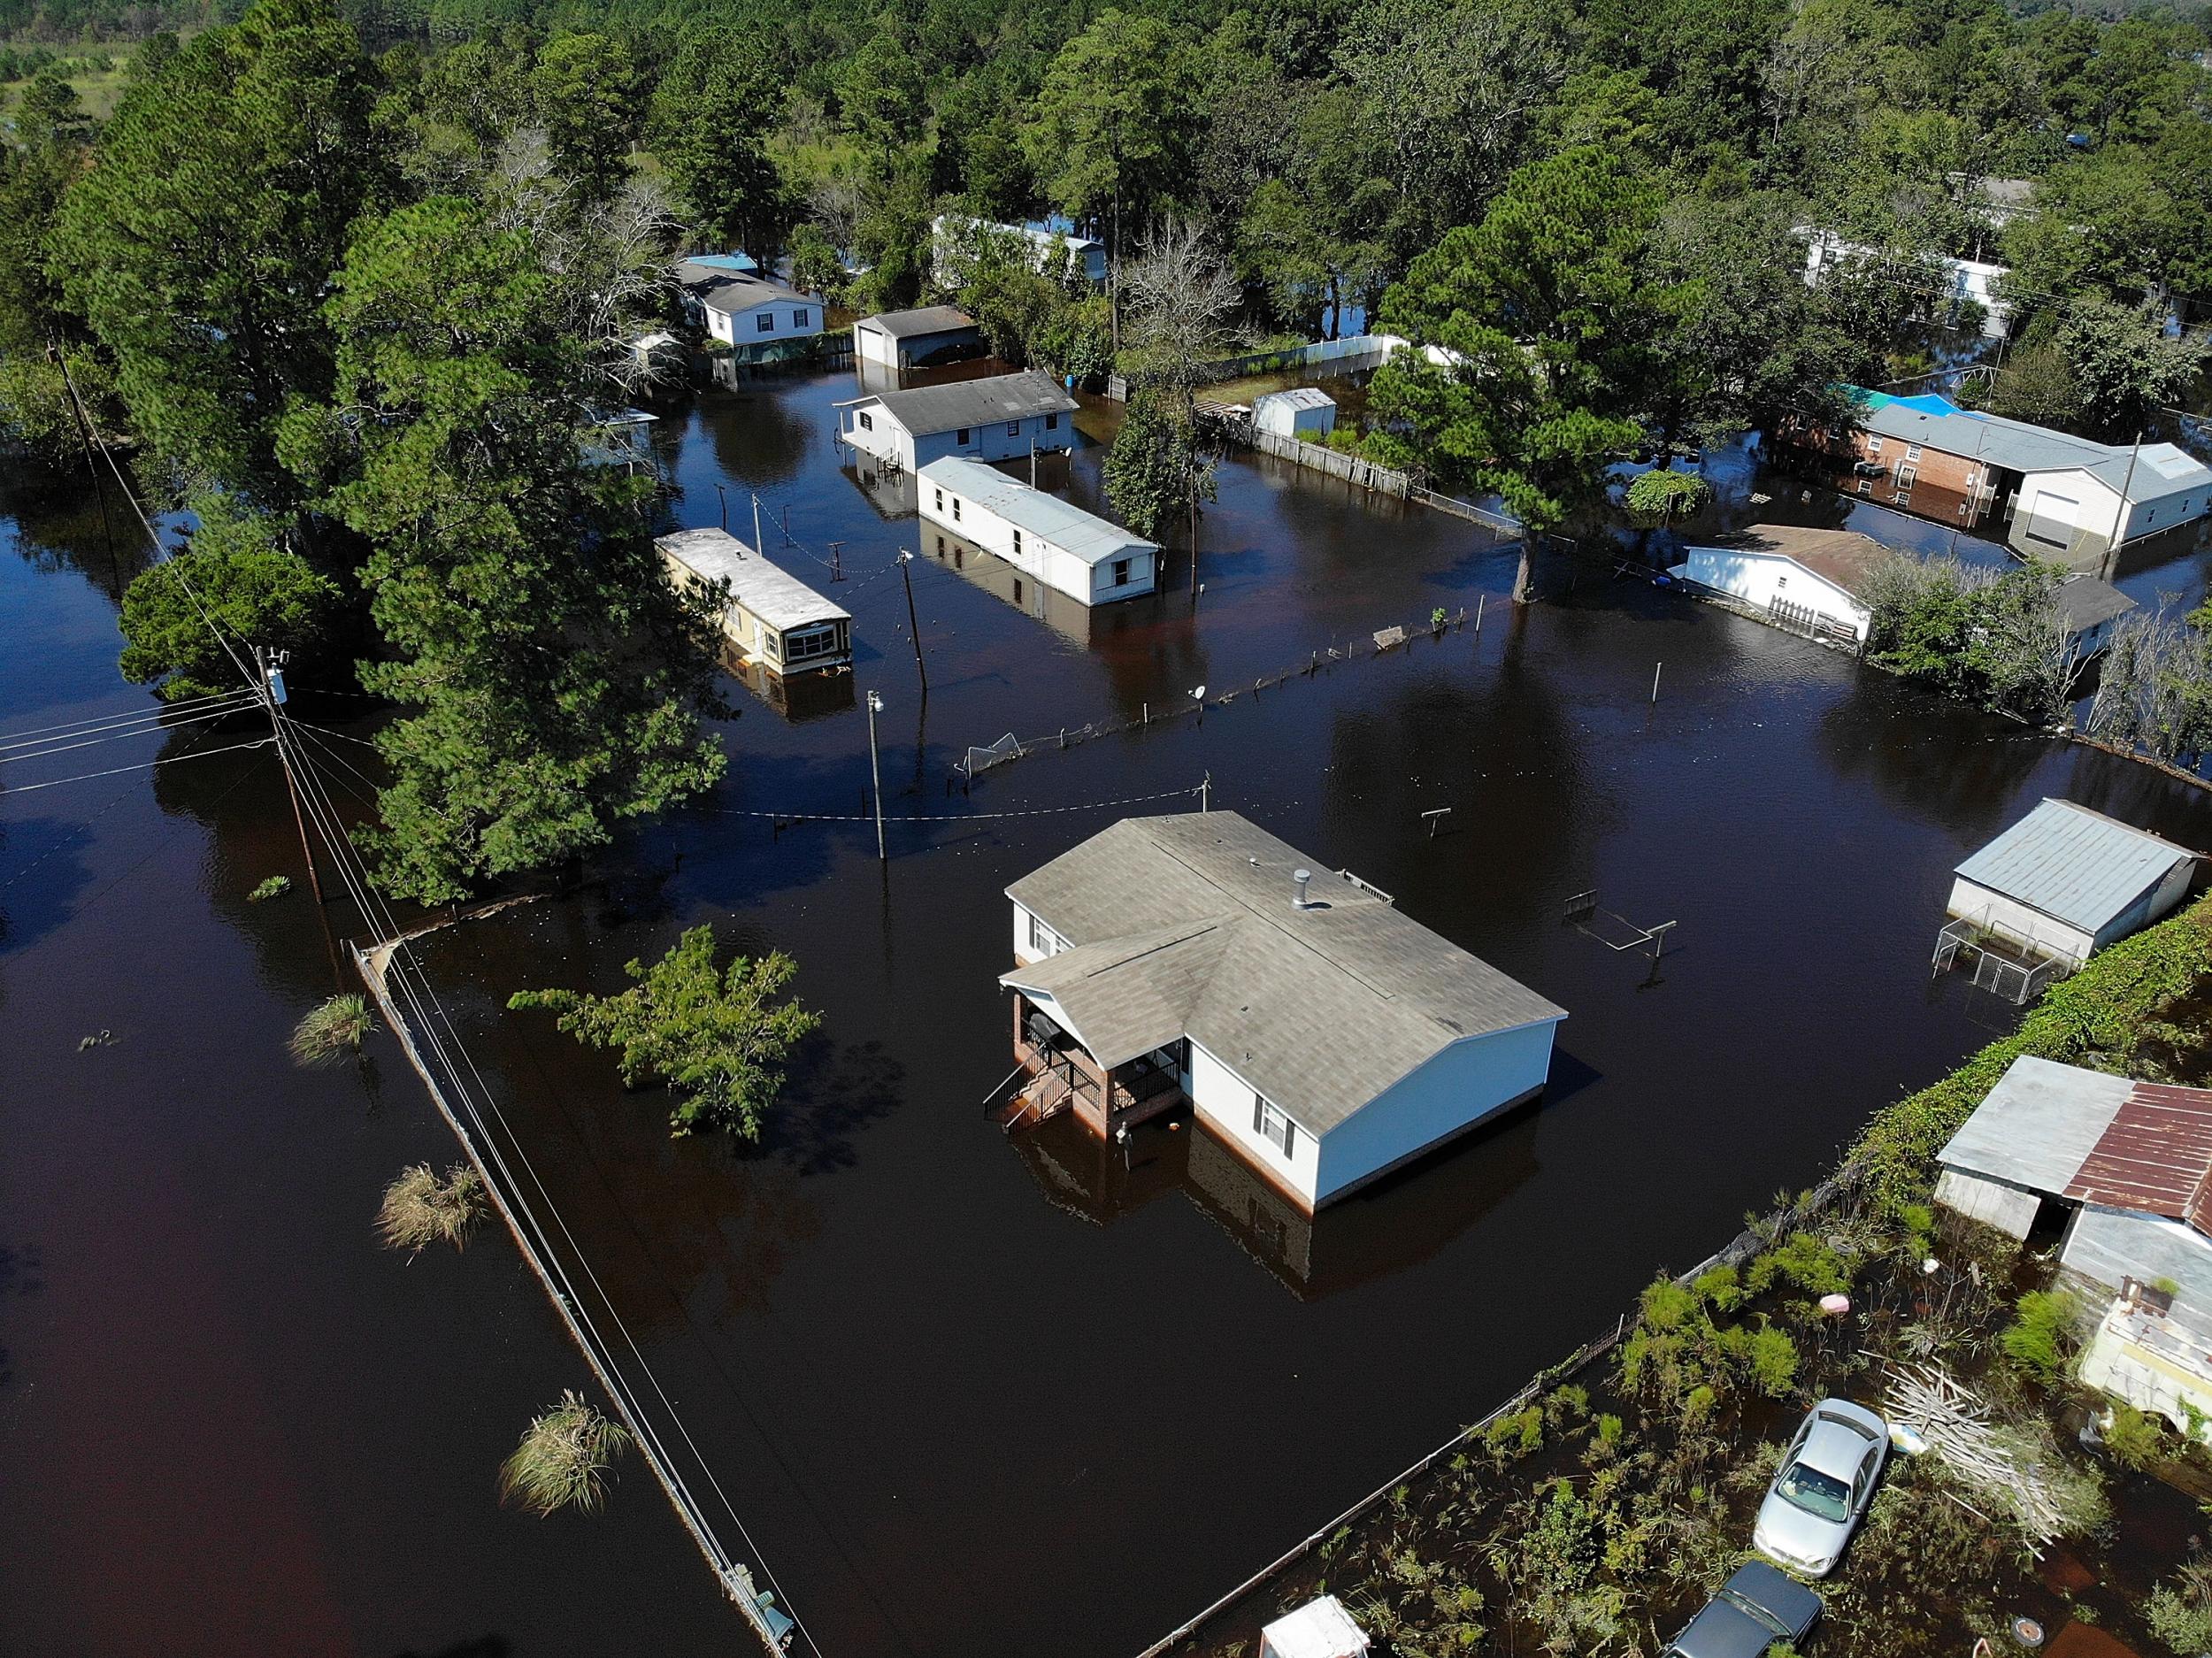 Flood waters isolate homes in Lumberton, North Carolina, in the aftermath of Hurricane Florence last September